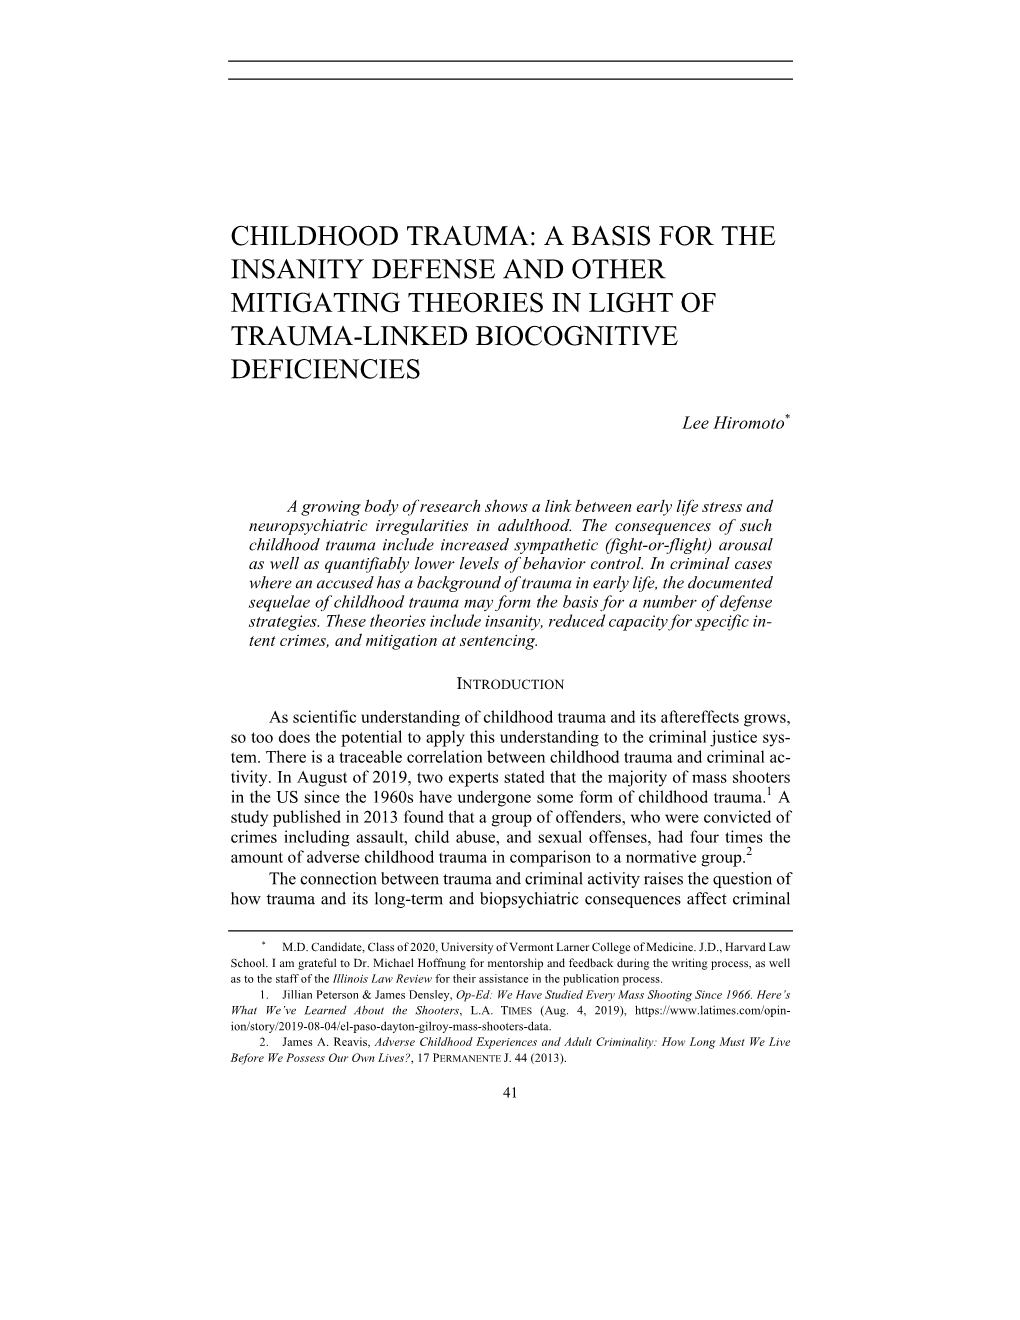 Childhood Trauma: a Basis for the Insanity Defense and Other Mitigating Theories in Light of Trauma-Linked Biocognitive Deficiencies